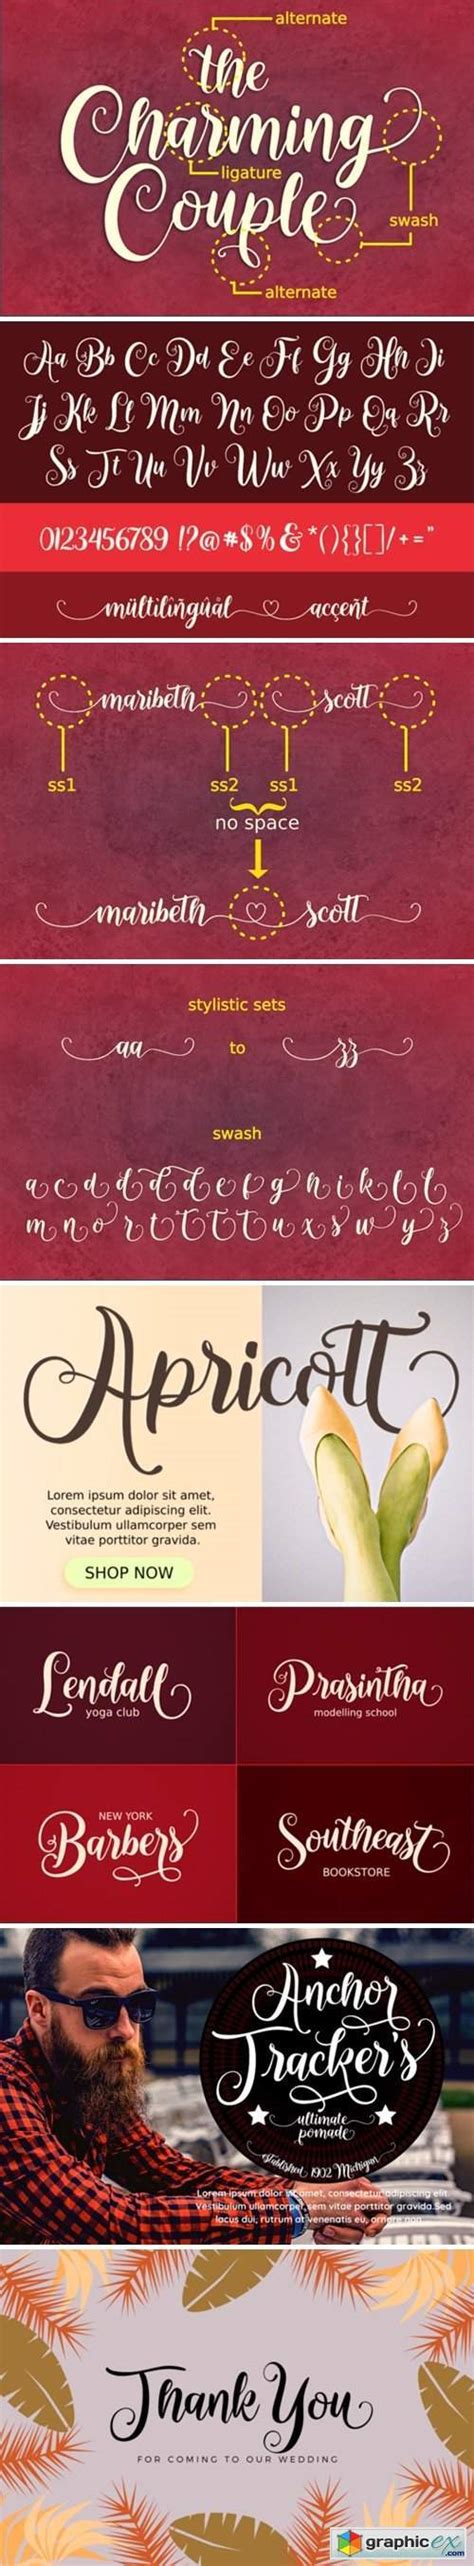 The Charming Couple Font Free Download Vector Stock Image Photoshop Icon